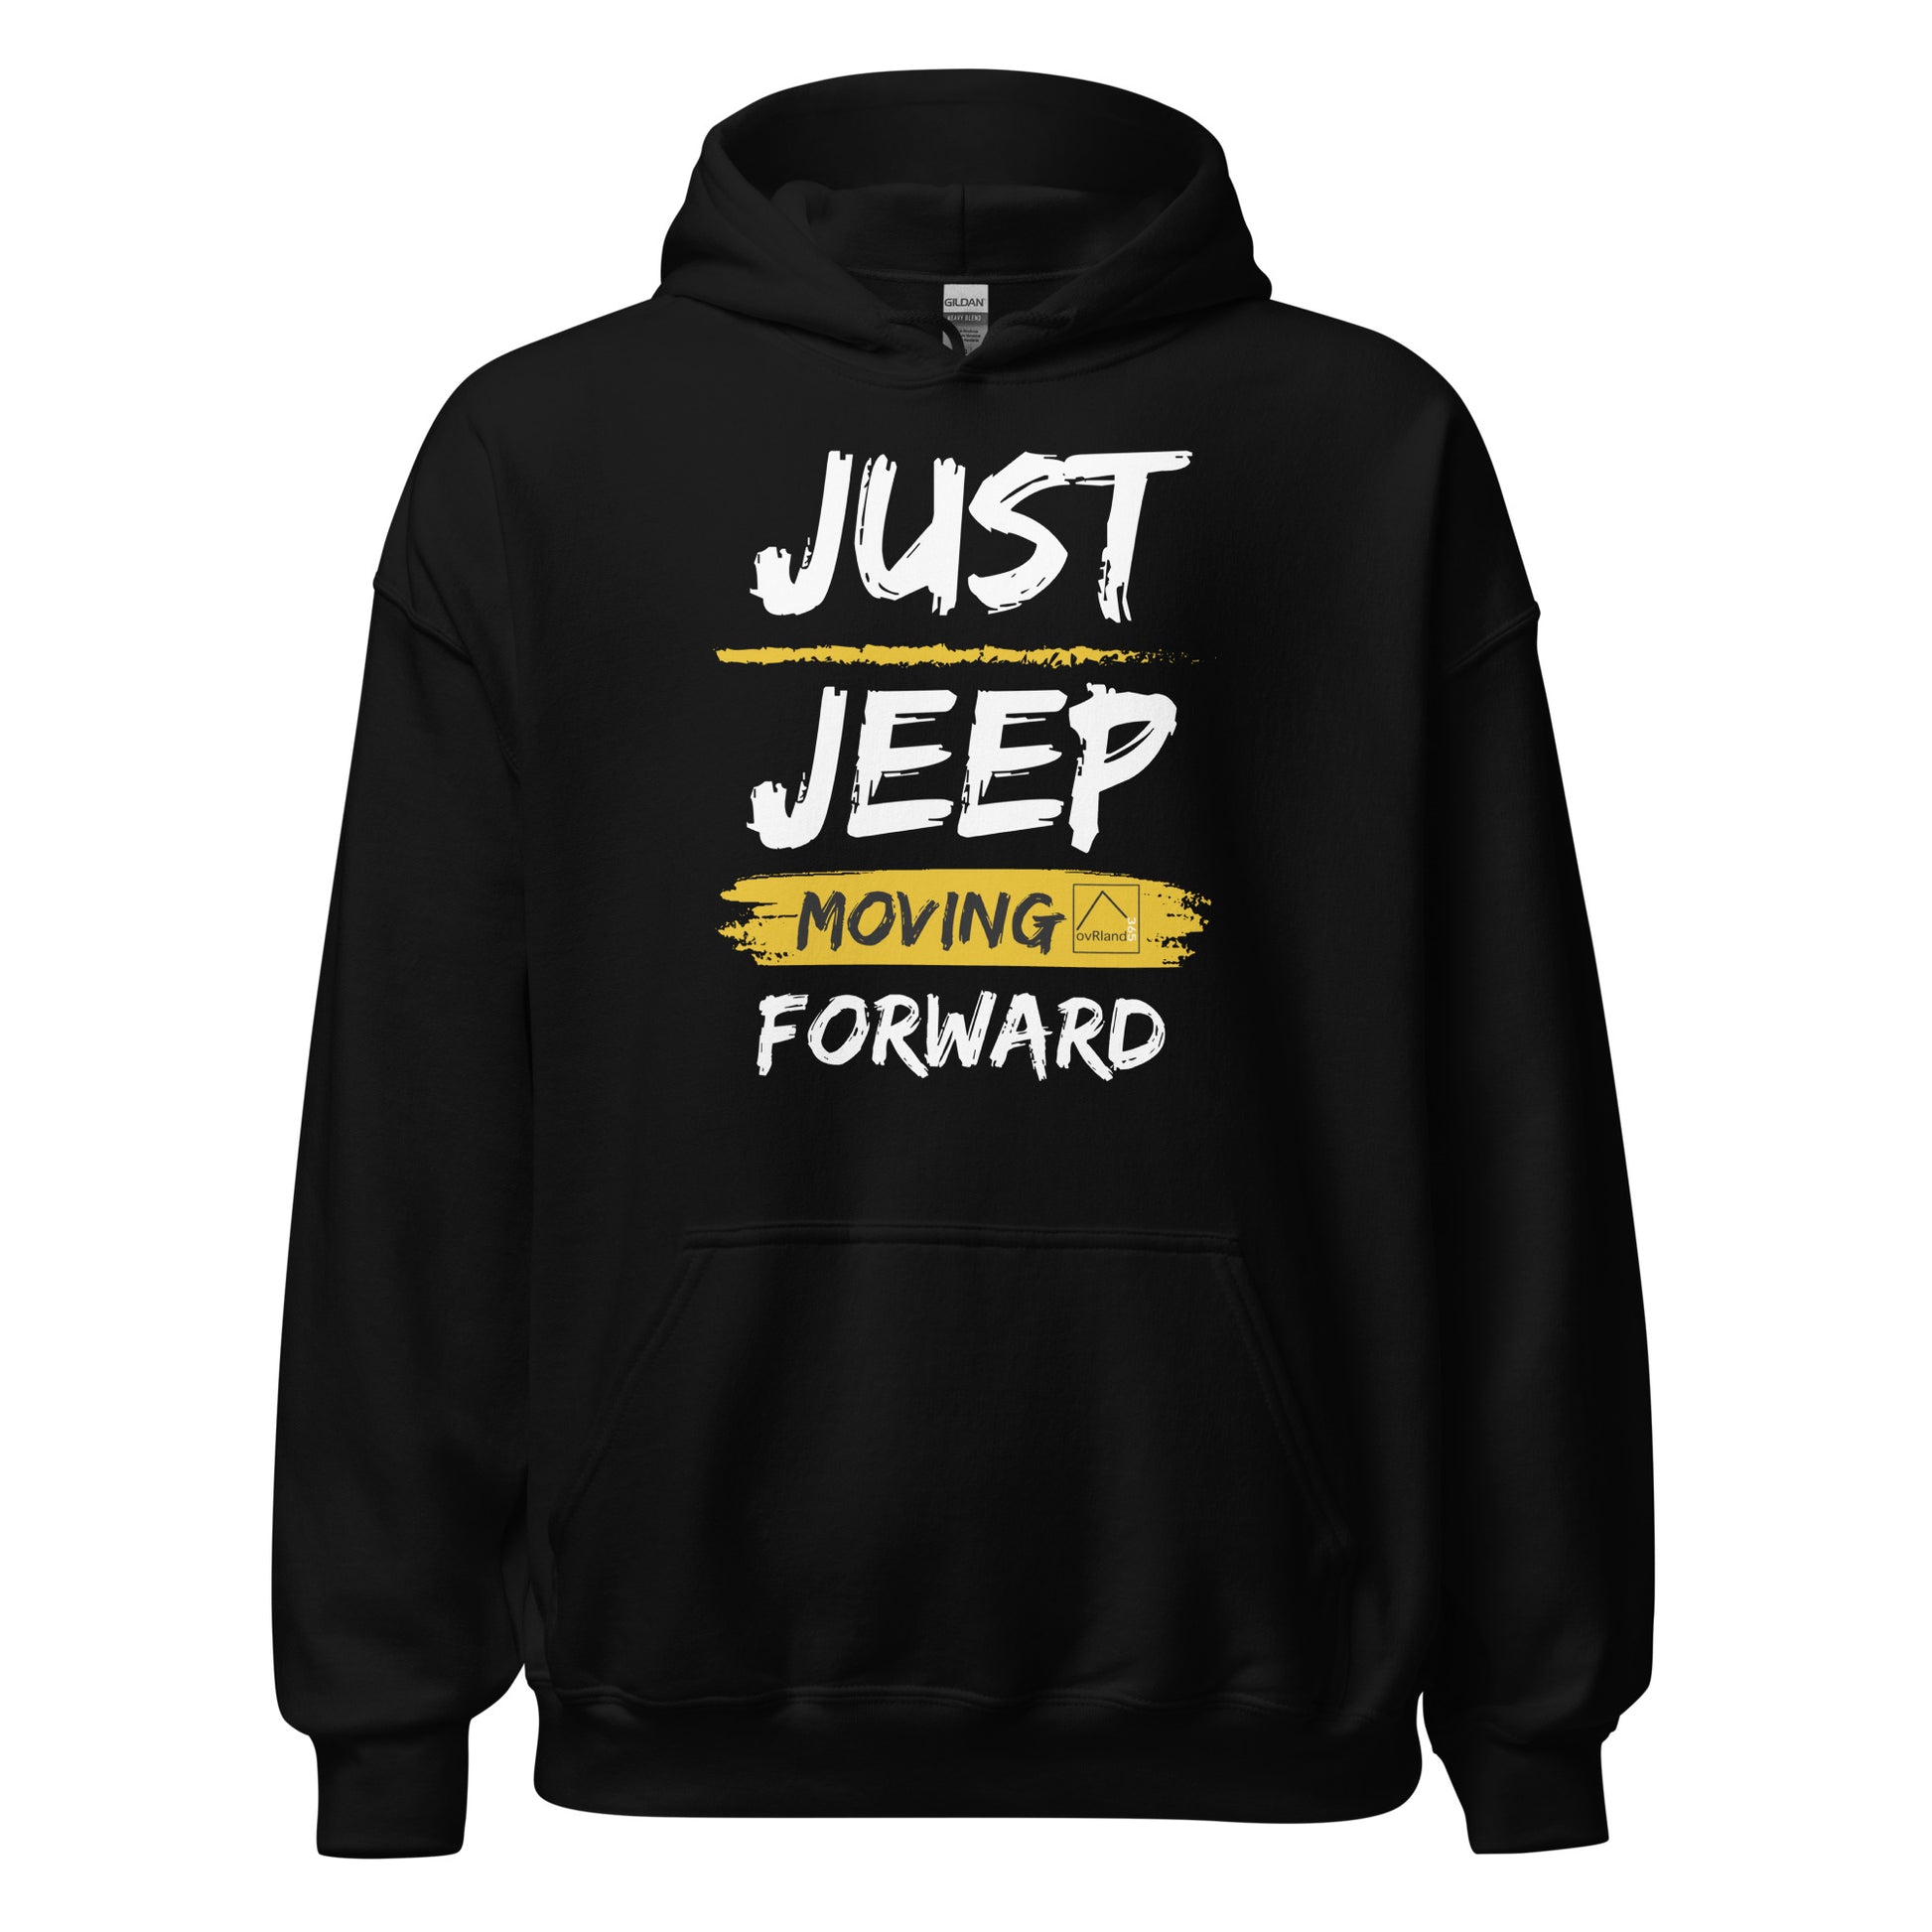 Just JEEP Moving Forward. Black hoodie. overland365.com